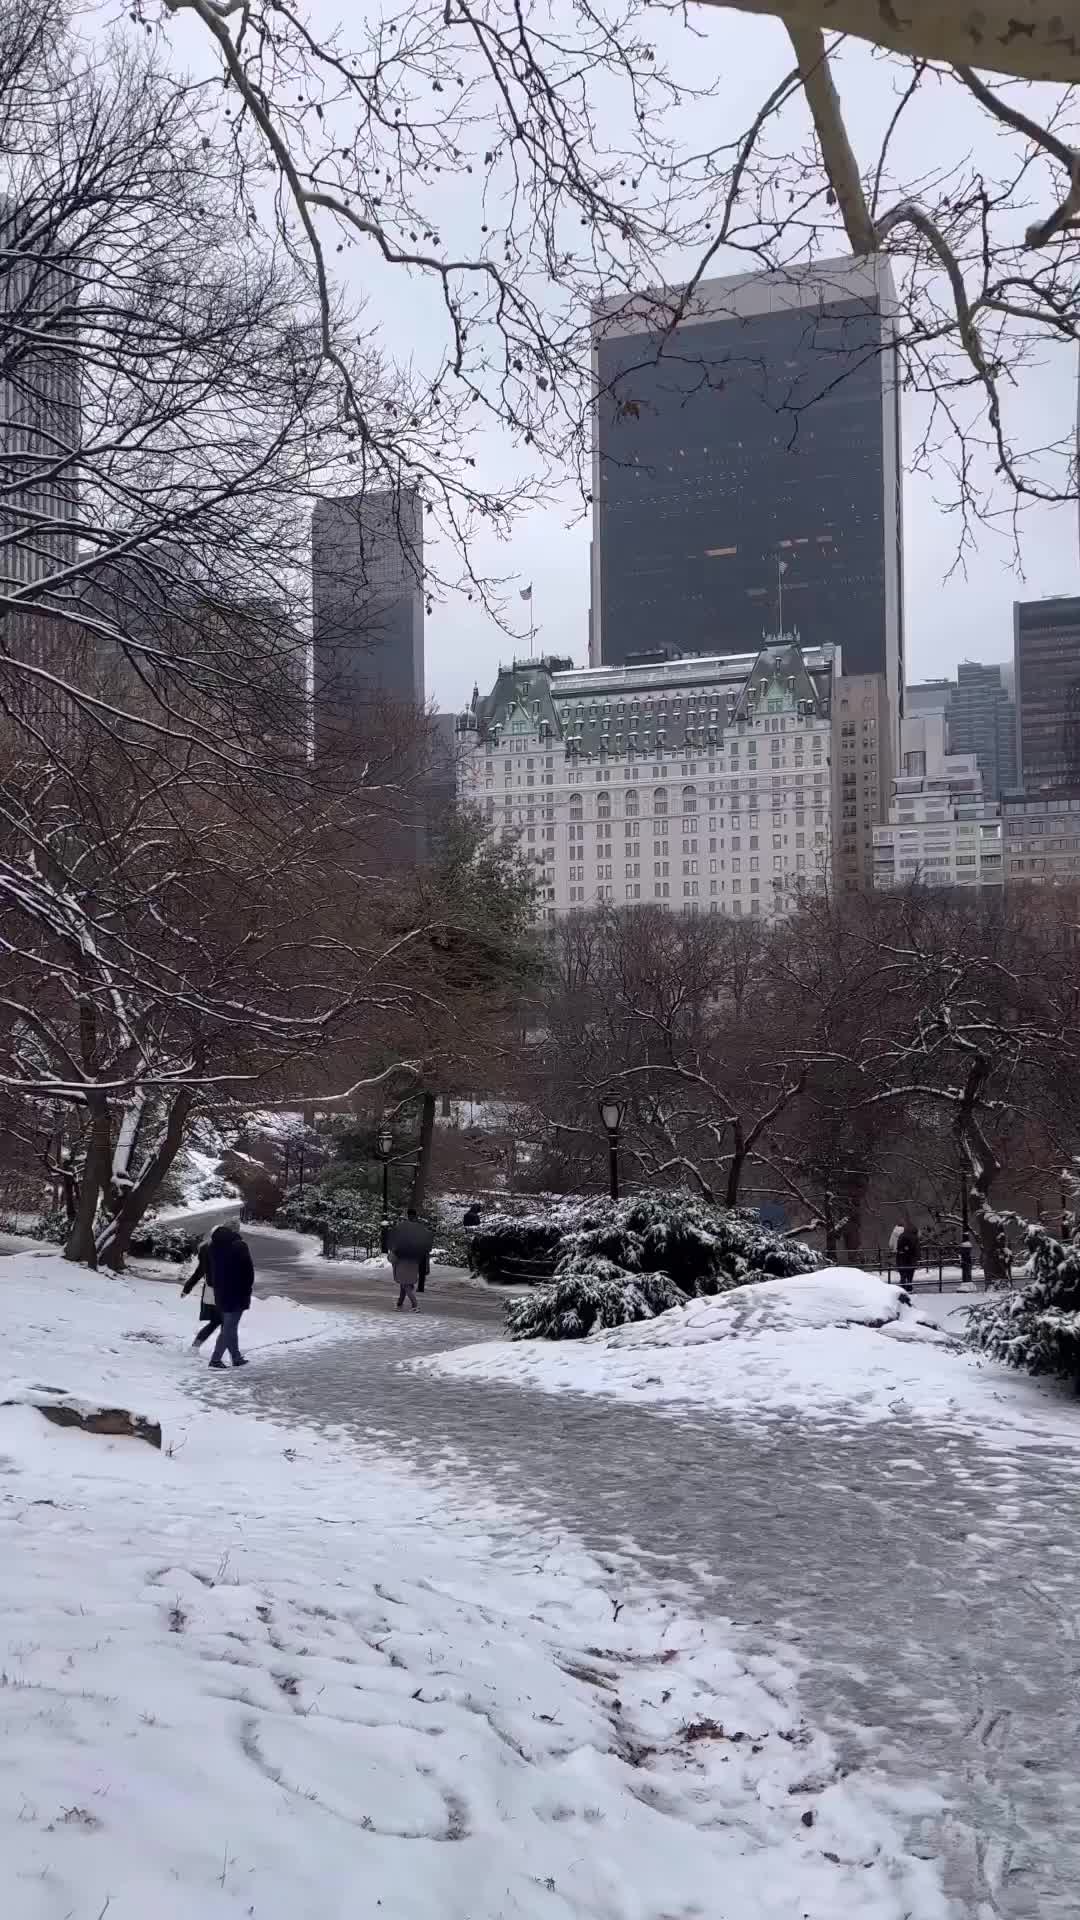 Snowy Central Park in New York City Today! ❄️✨